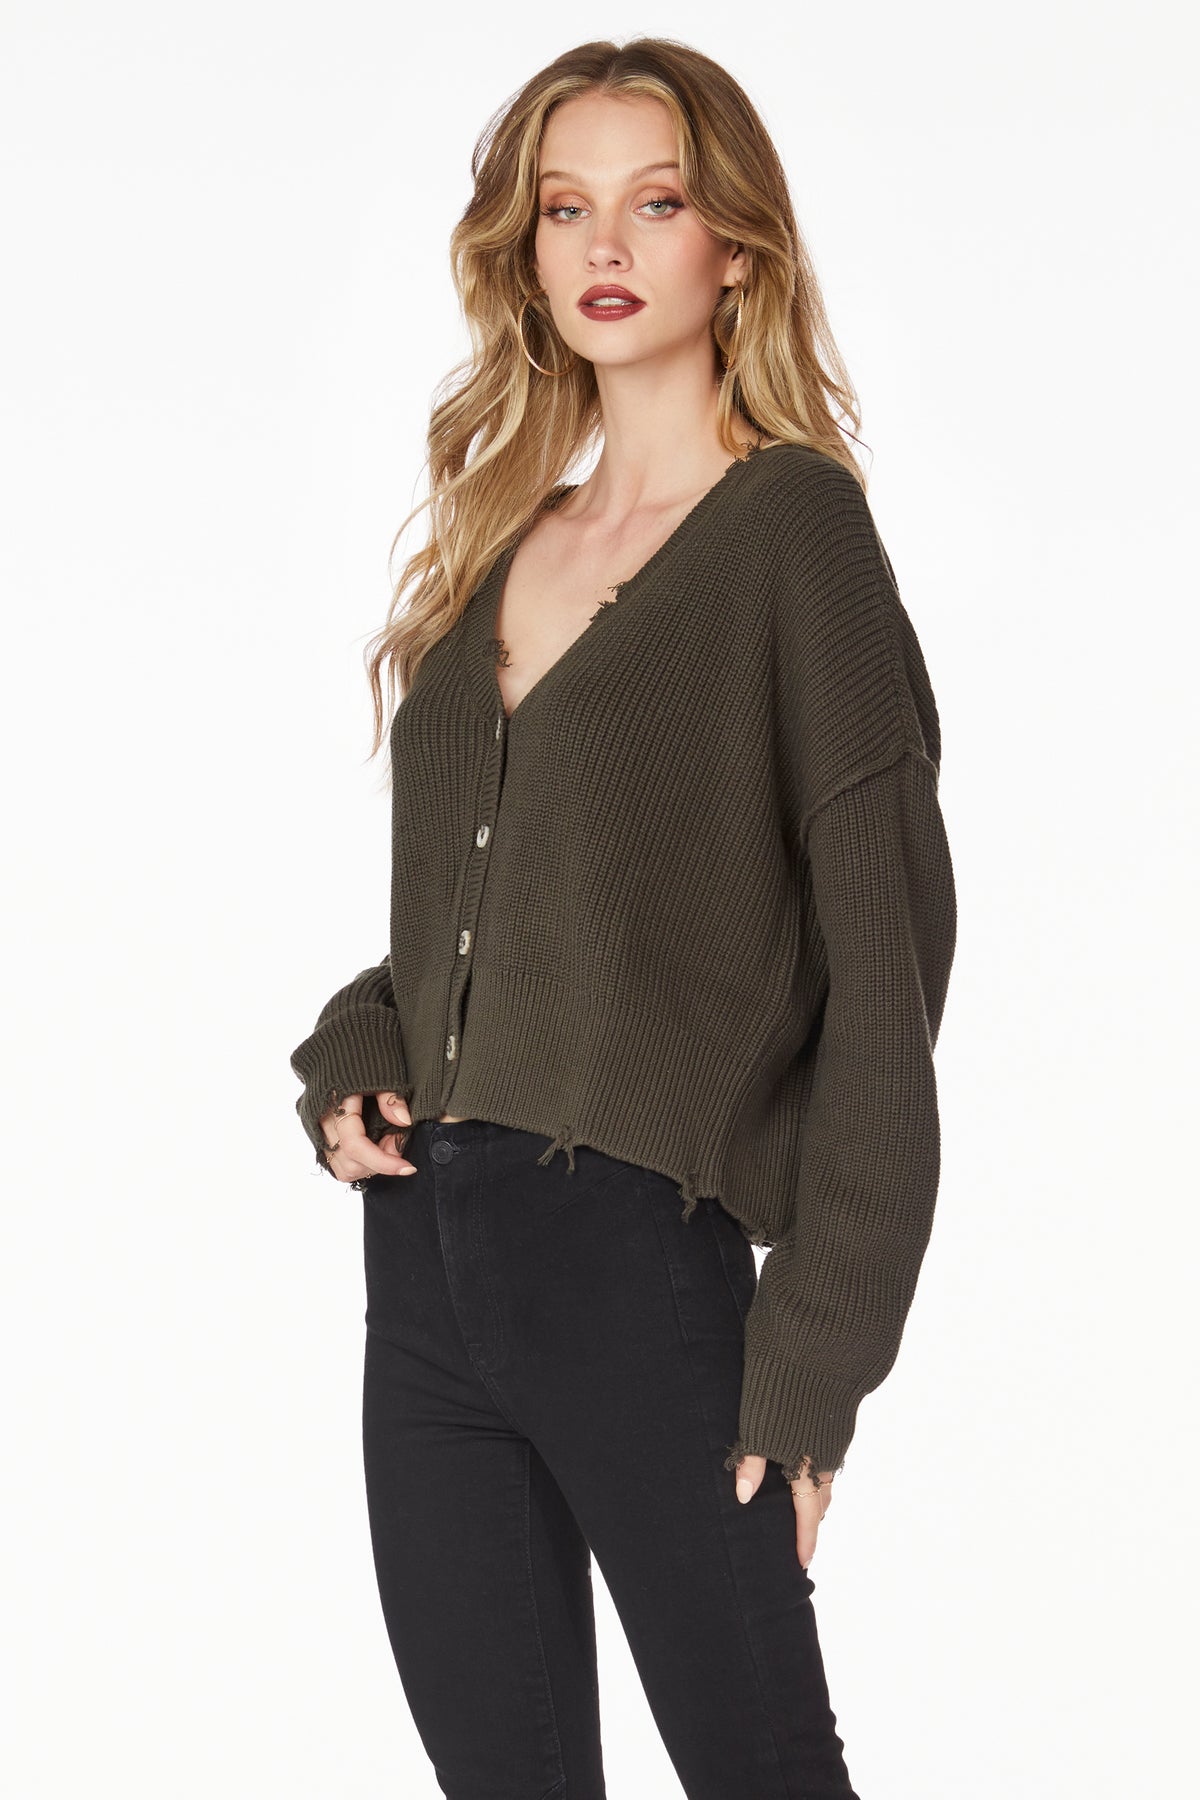 DISTRESSED BUTTON FRONT CARDIGAN